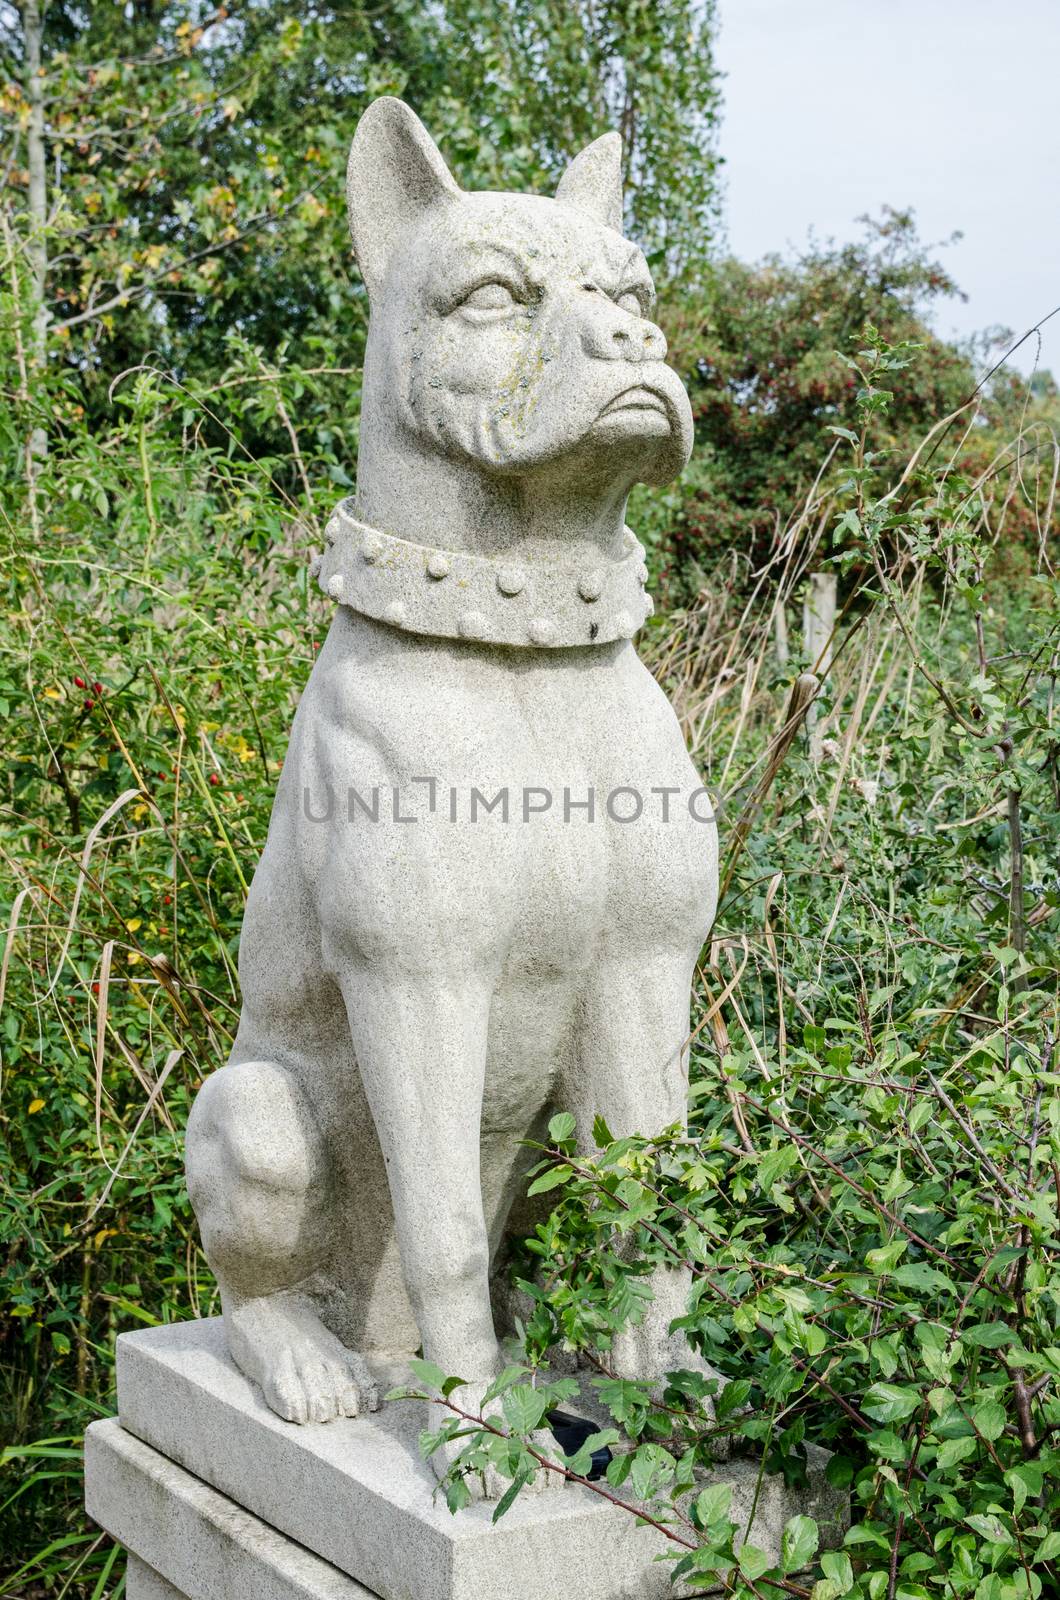 Granite sculpture of an imposing guard dog wearing a thick studded collar at the entrance to the historic King's Observatory in Old Deer Park, Richmond-Upon-Thames, London.